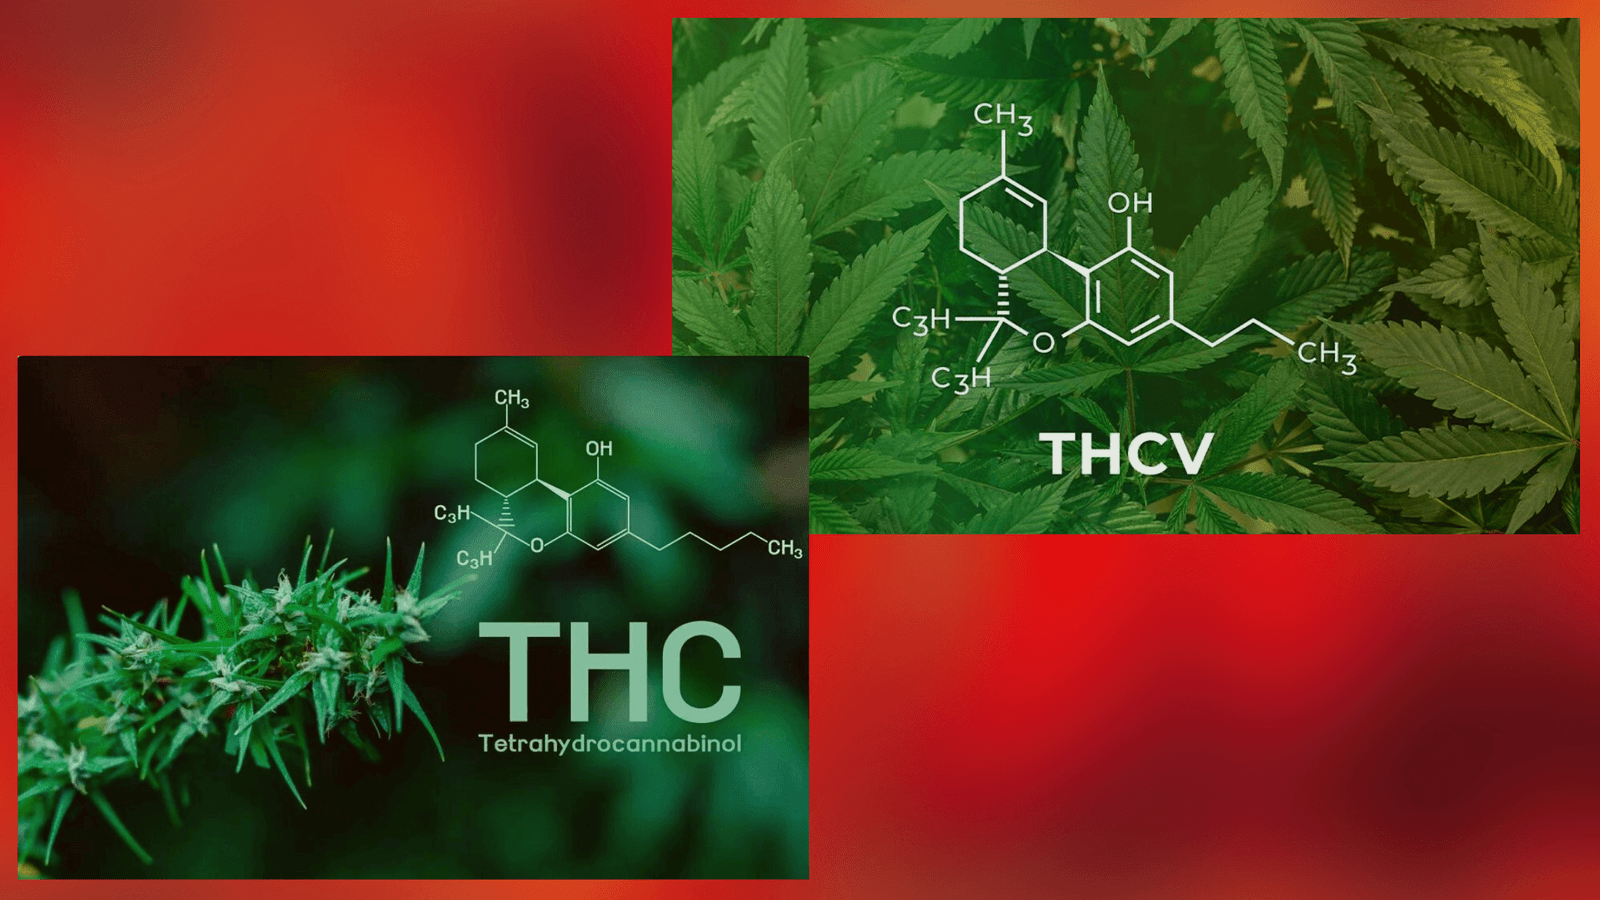 A Comparison between THCv and THC